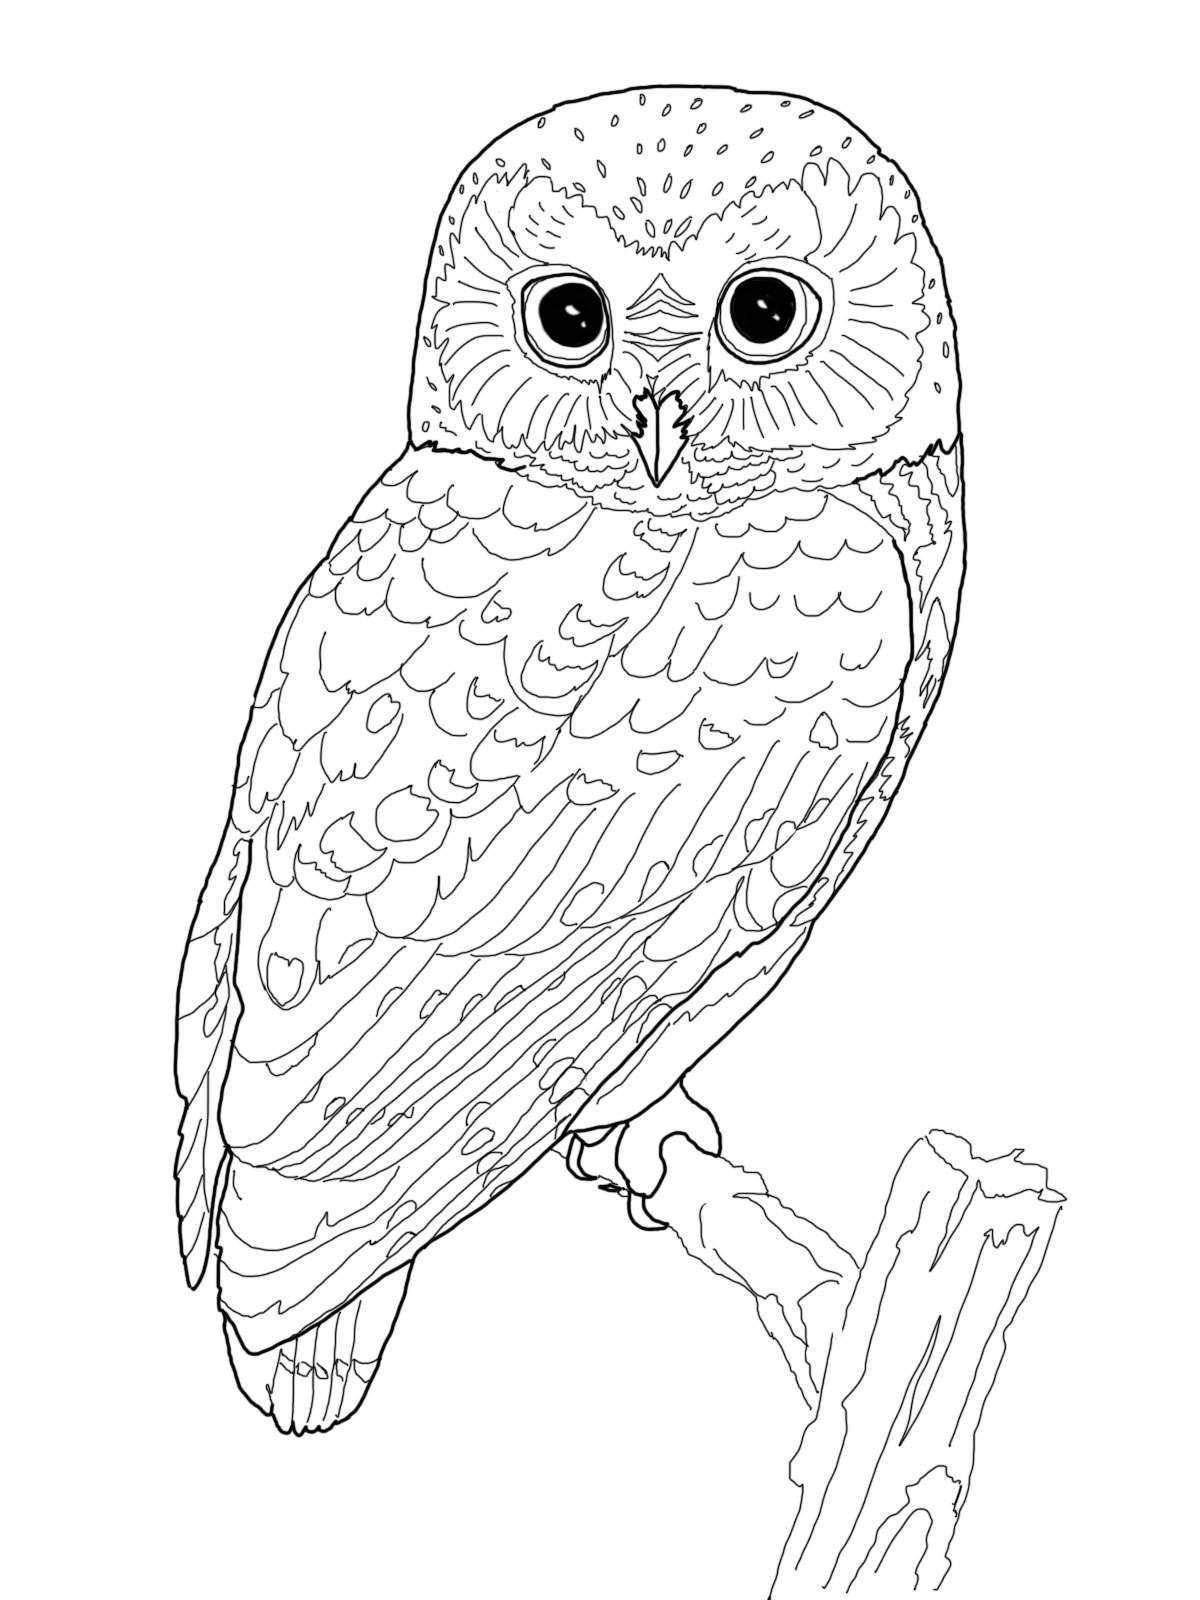 Intriguing long-eared owl coloring book